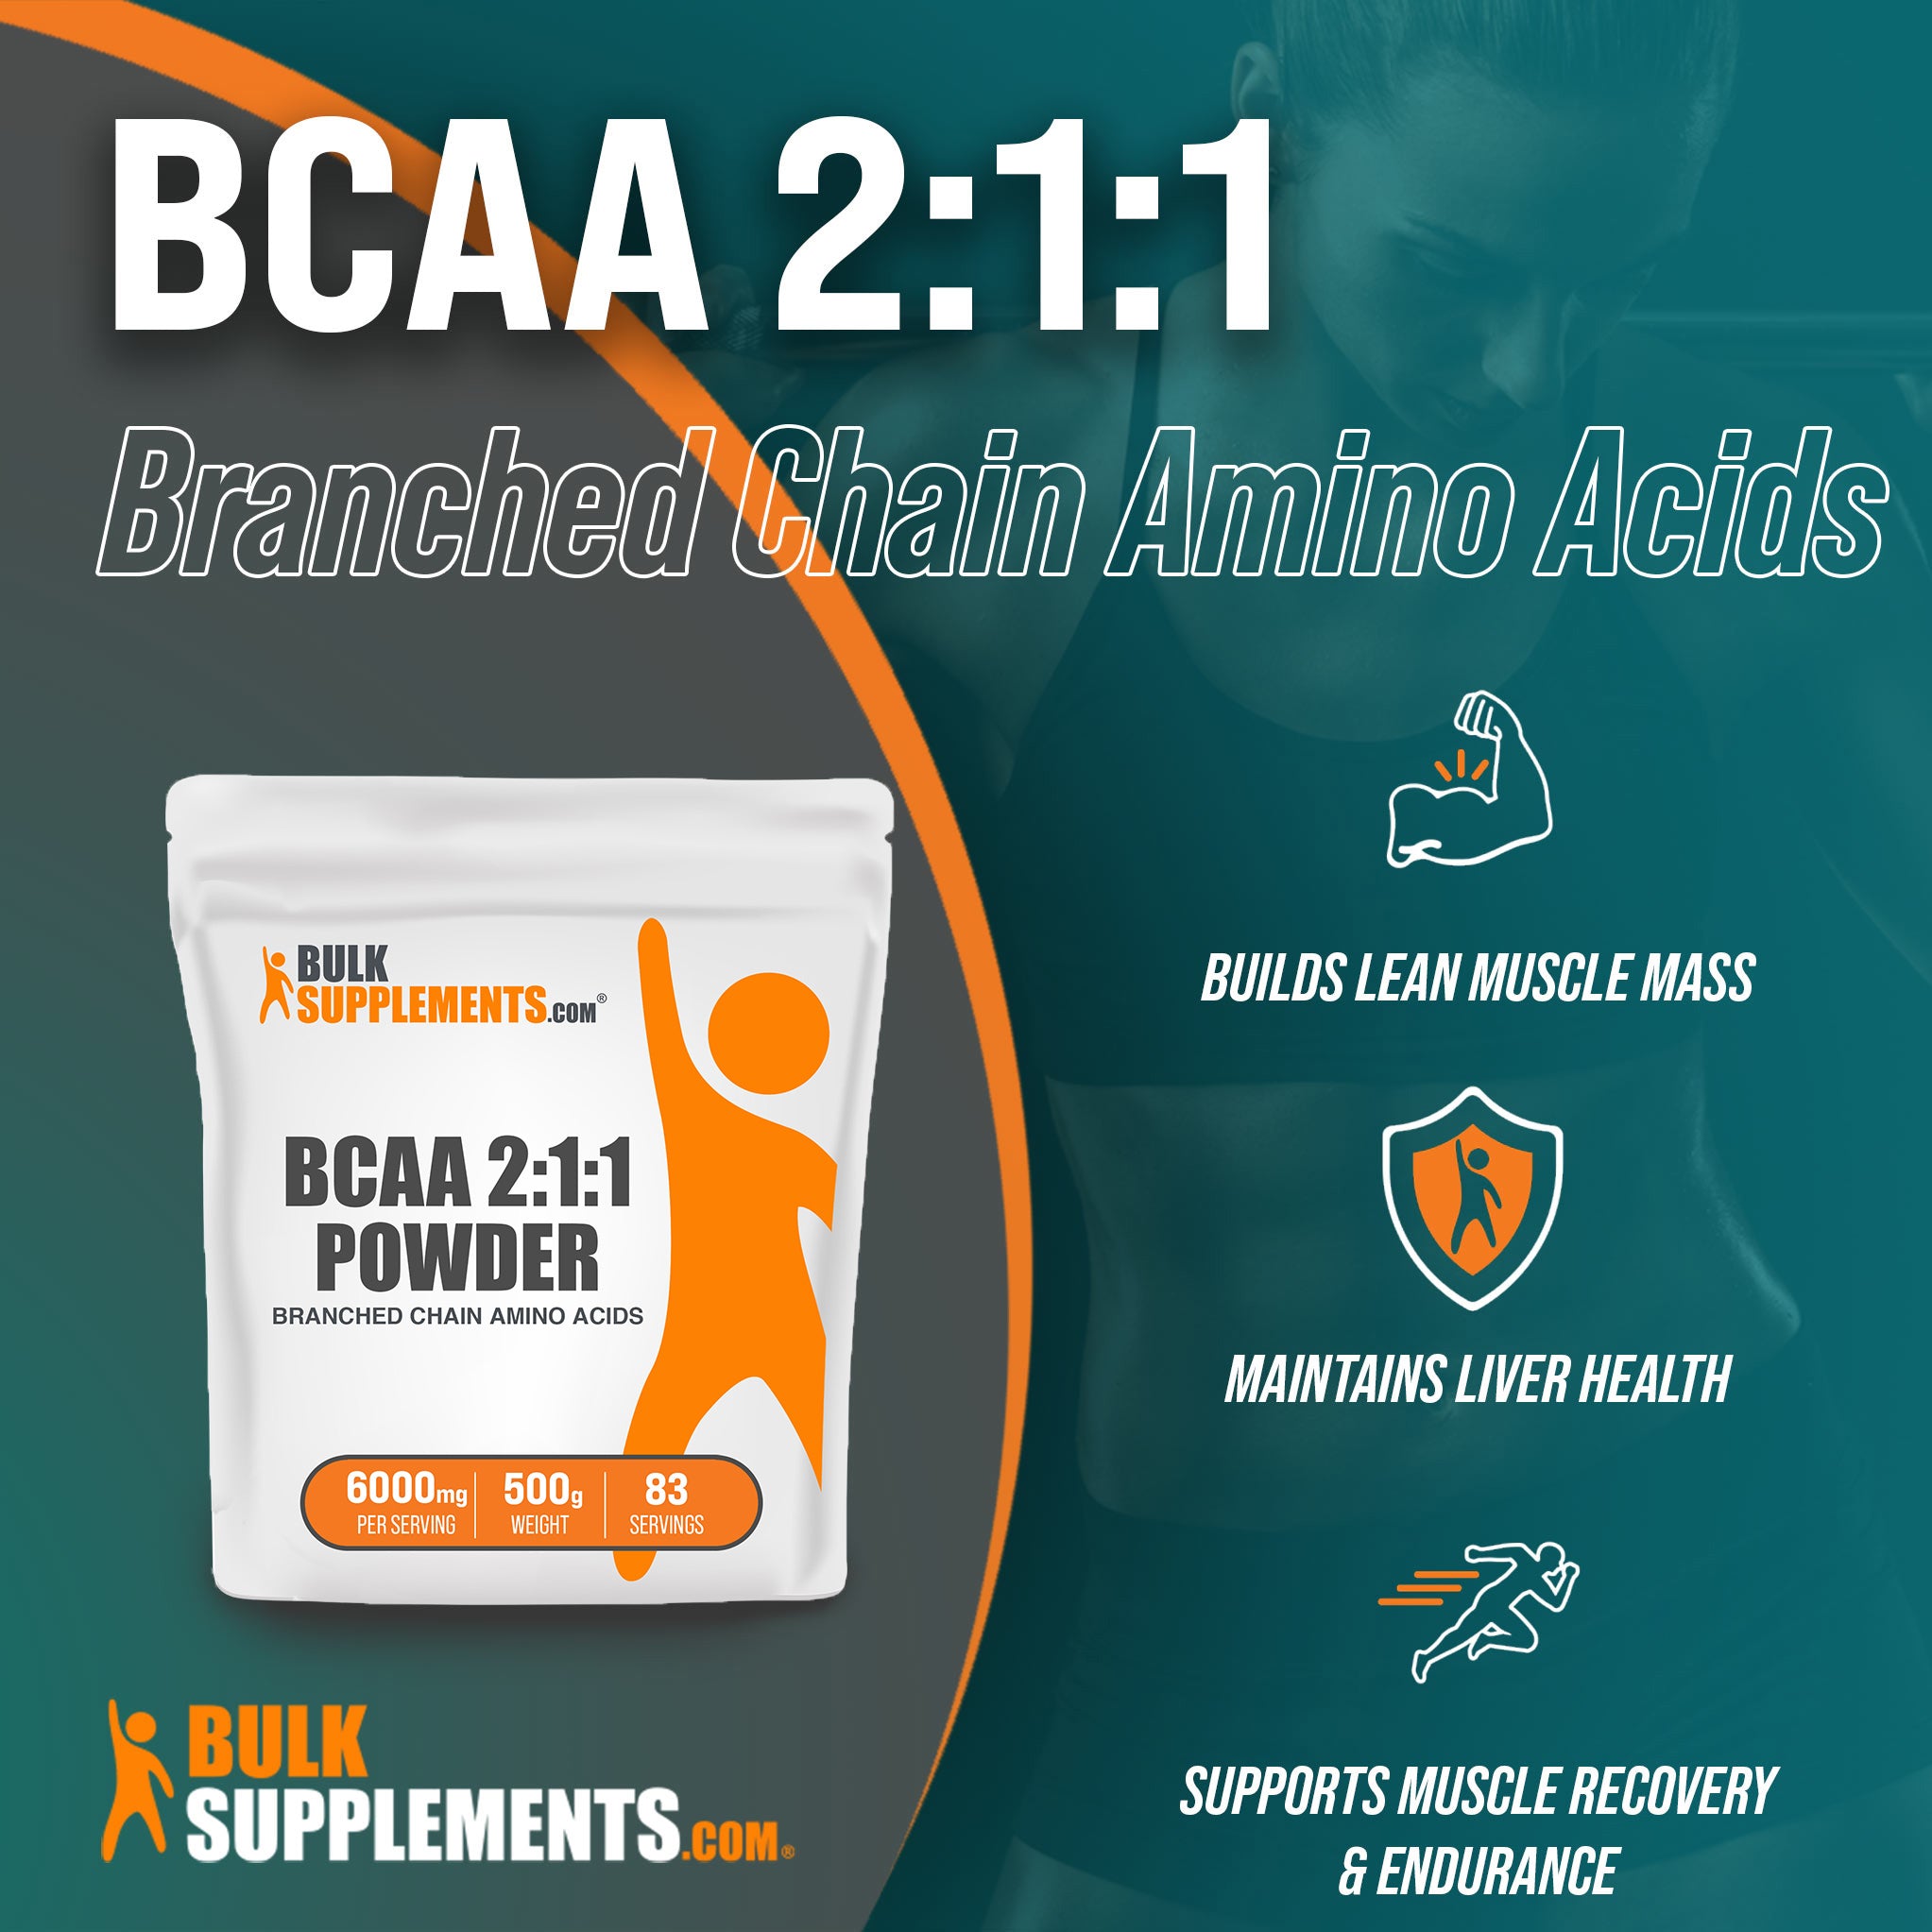 BCAA Powder (Branched Chain Amino Acids) from Bulk Supplements for building muscle mass